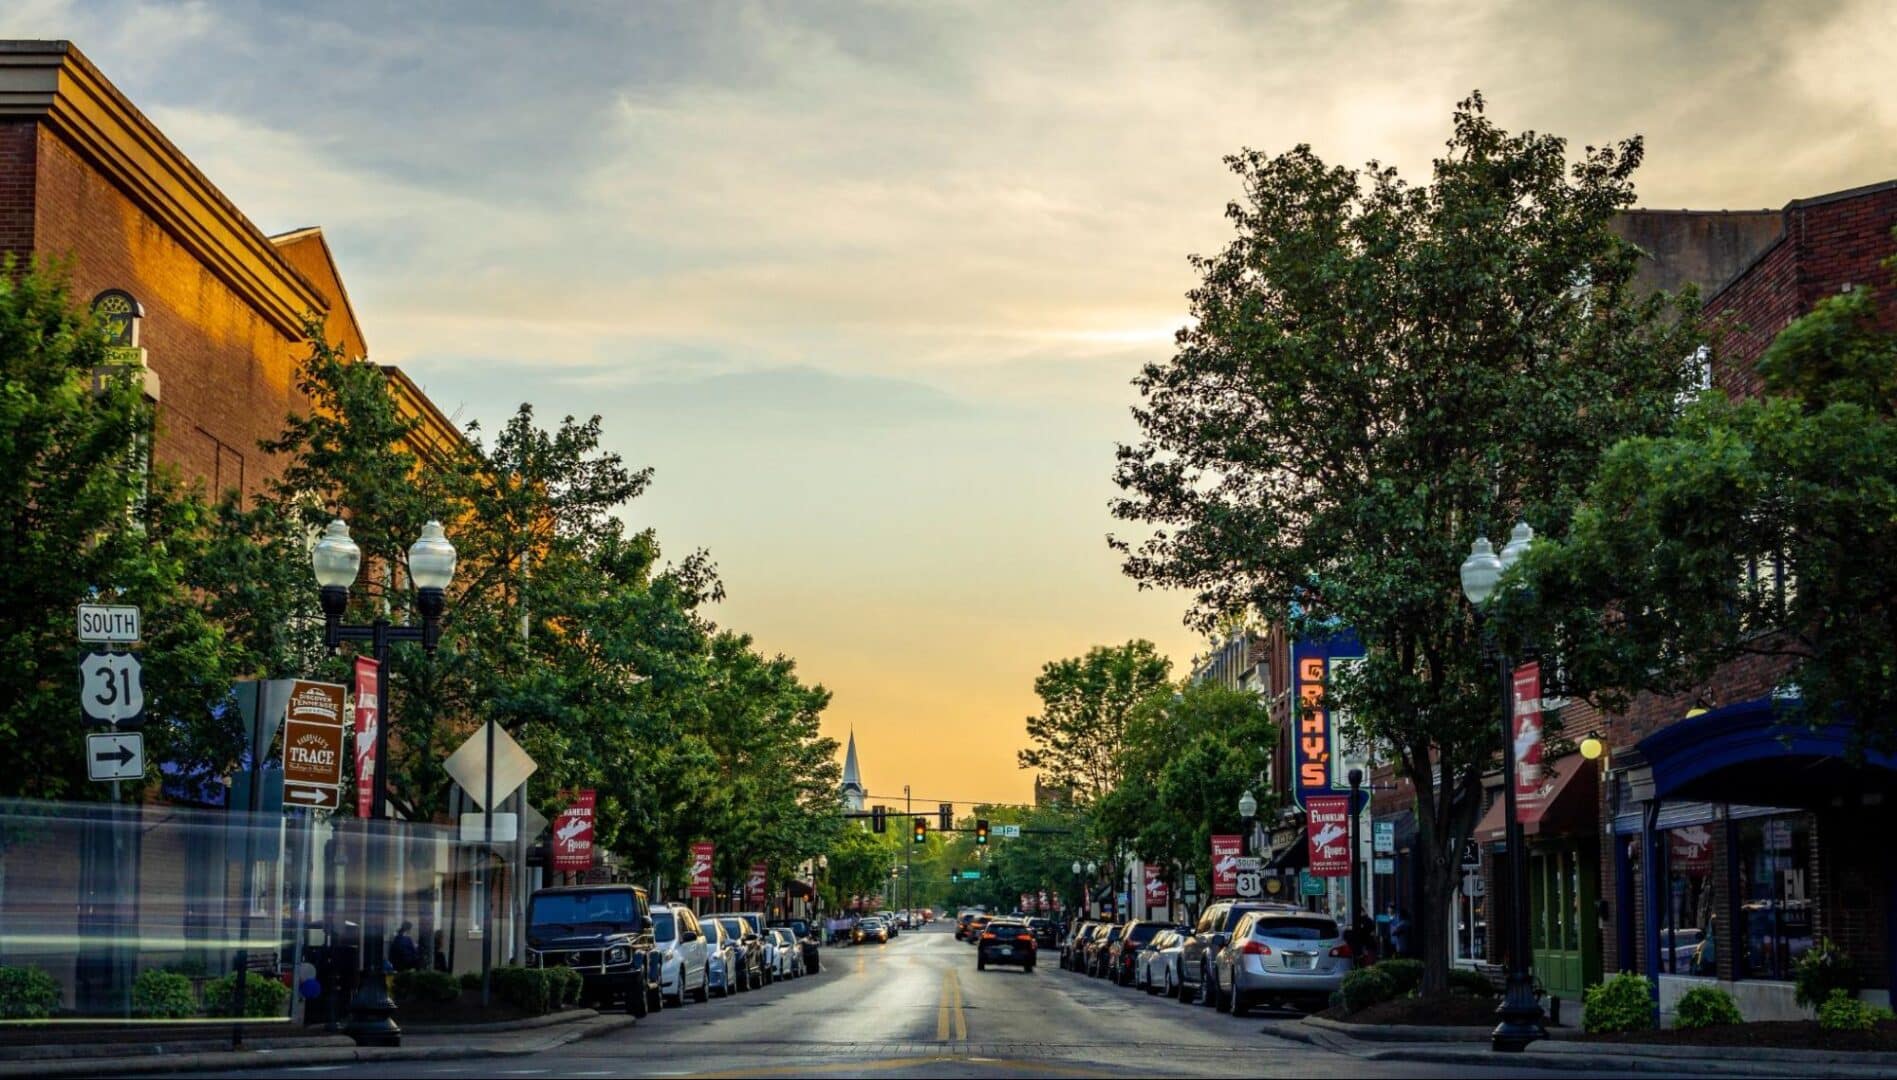 Downtown Franklin, find entertainment, restaurants, bars, live music, theatre events and more for a romantic date night!